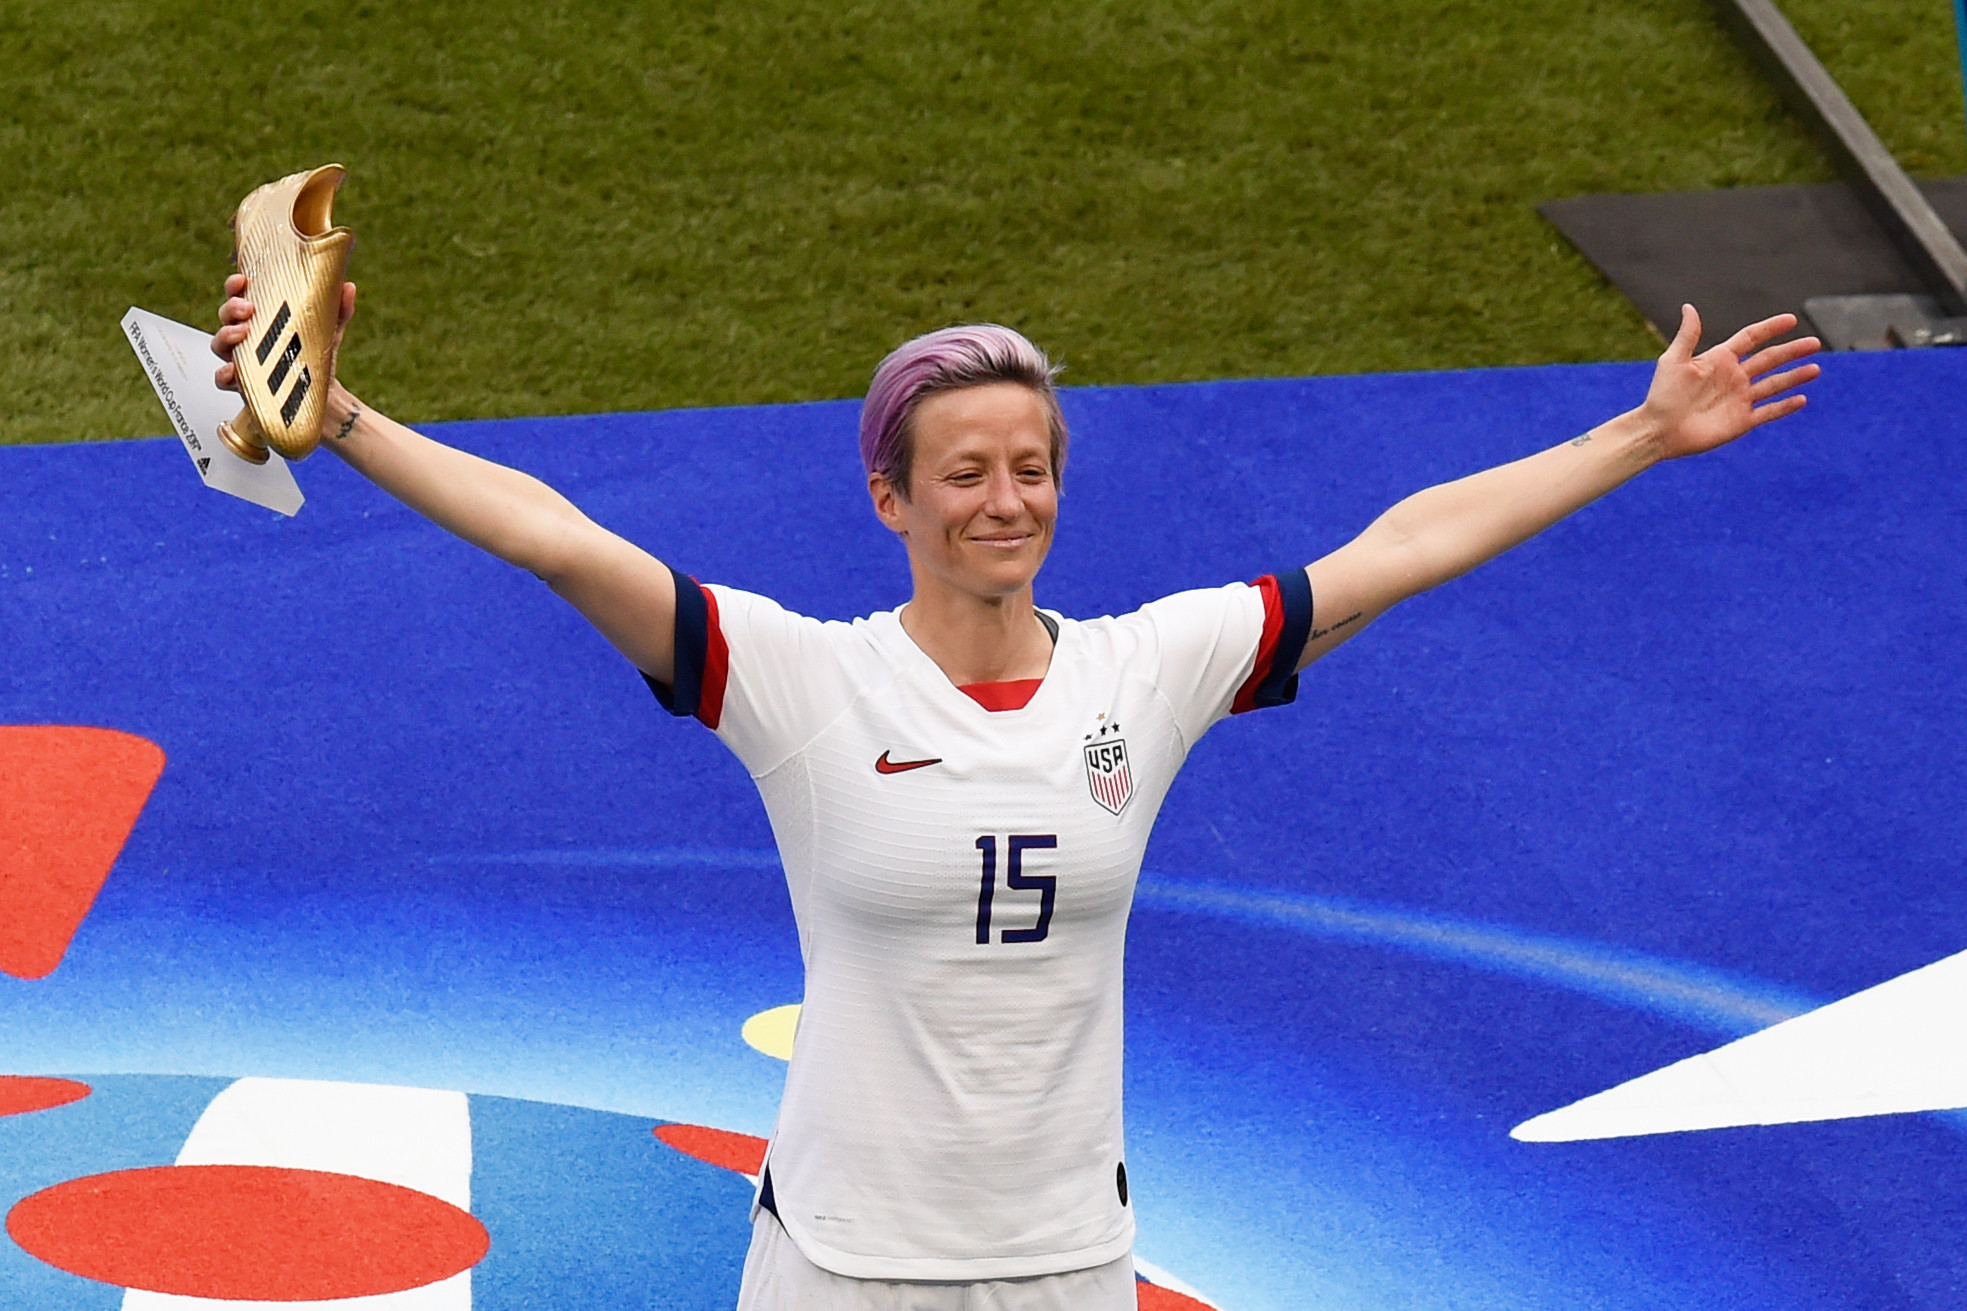 Rapinoe was presented with the Golden Boot after the match ©Getty Images